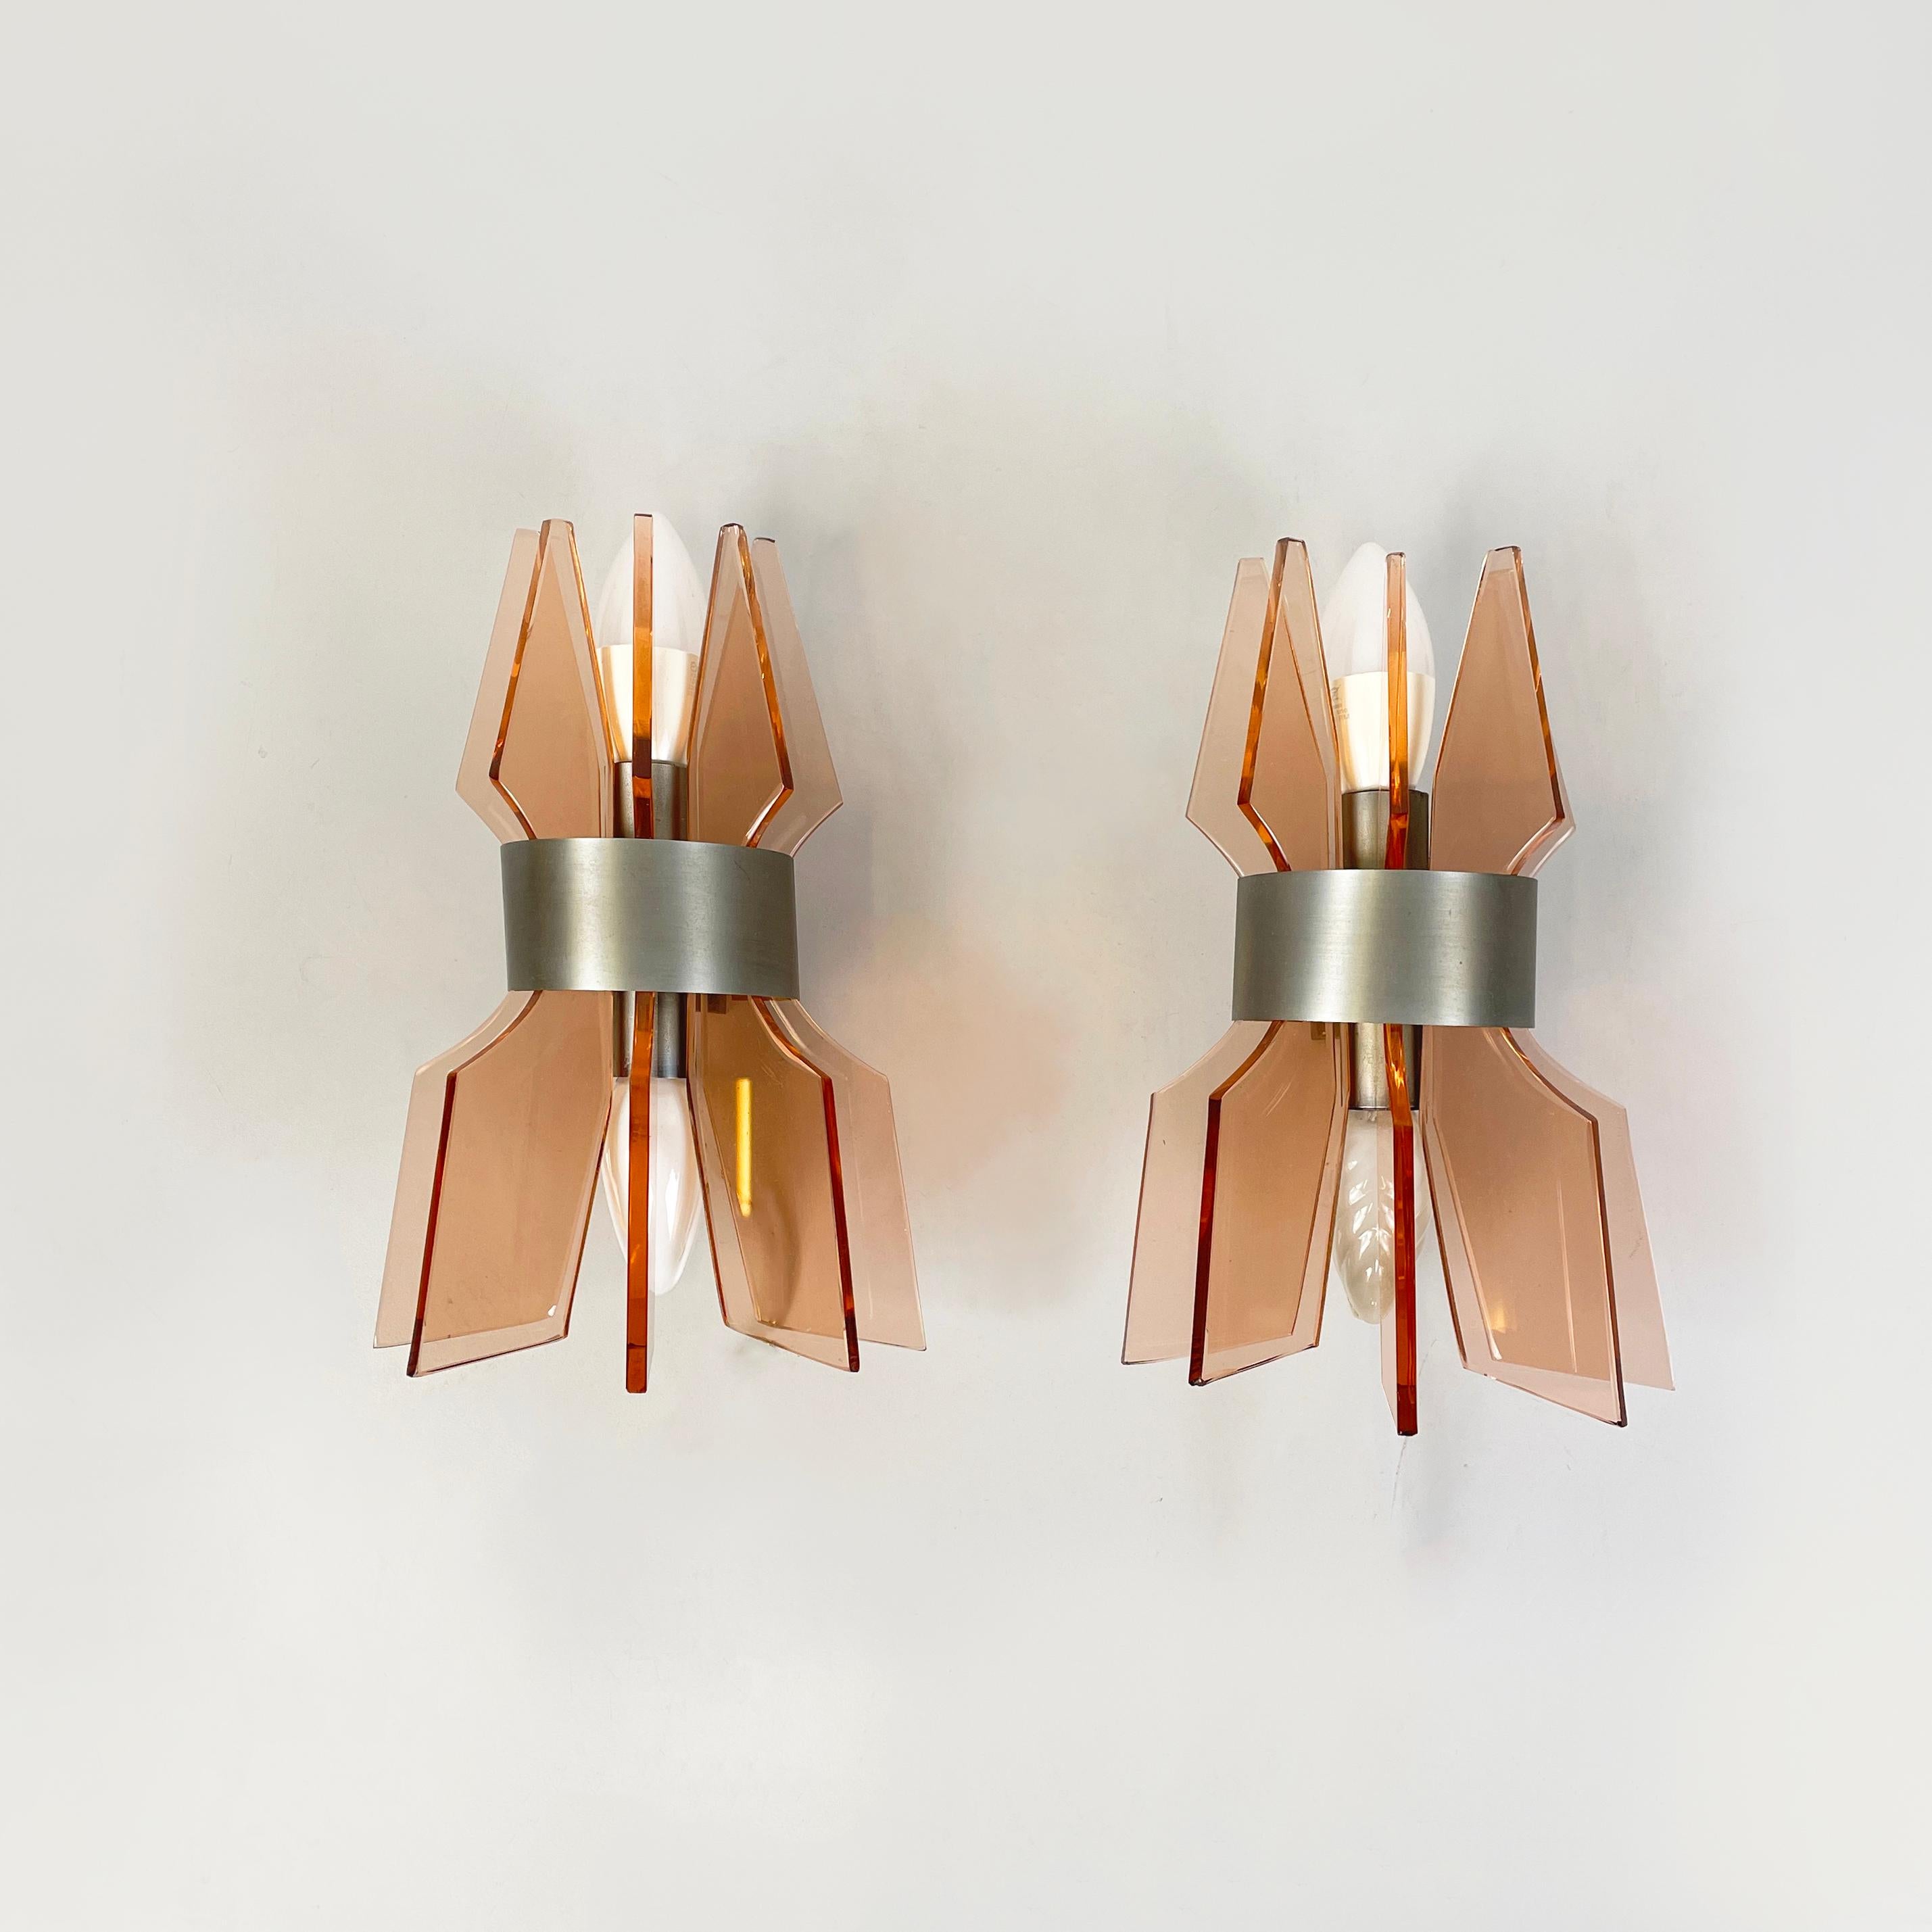 Mid-20th Century Italian mid-century modern Wall lamps in peach pink glass and metal, 1960s